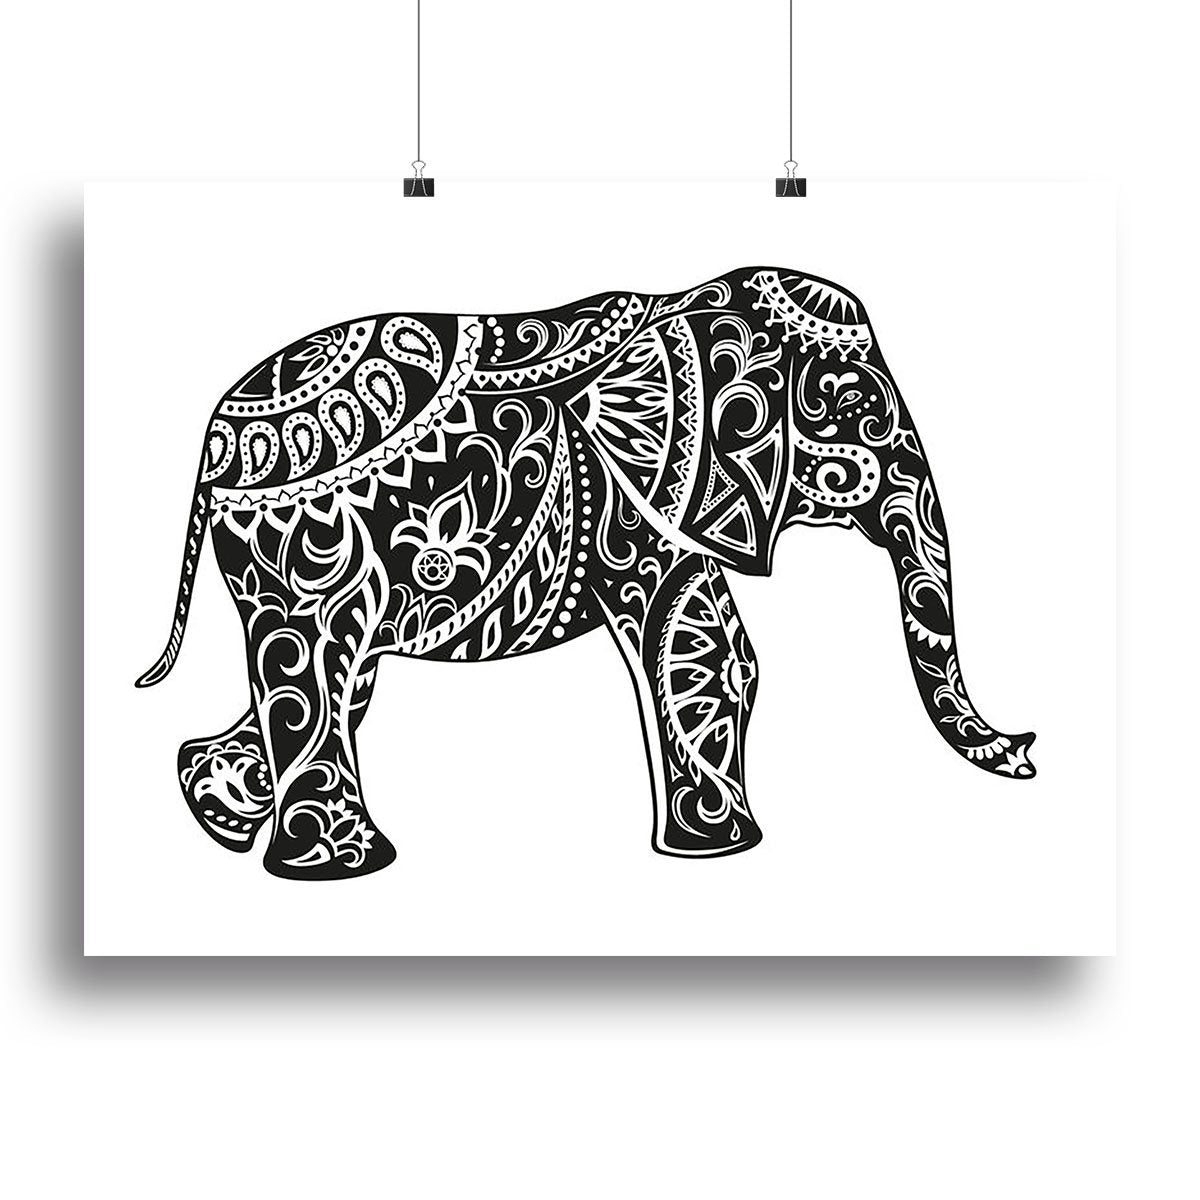 The stylized figure of an elephant in the festive patterns Canvas Print or Poster